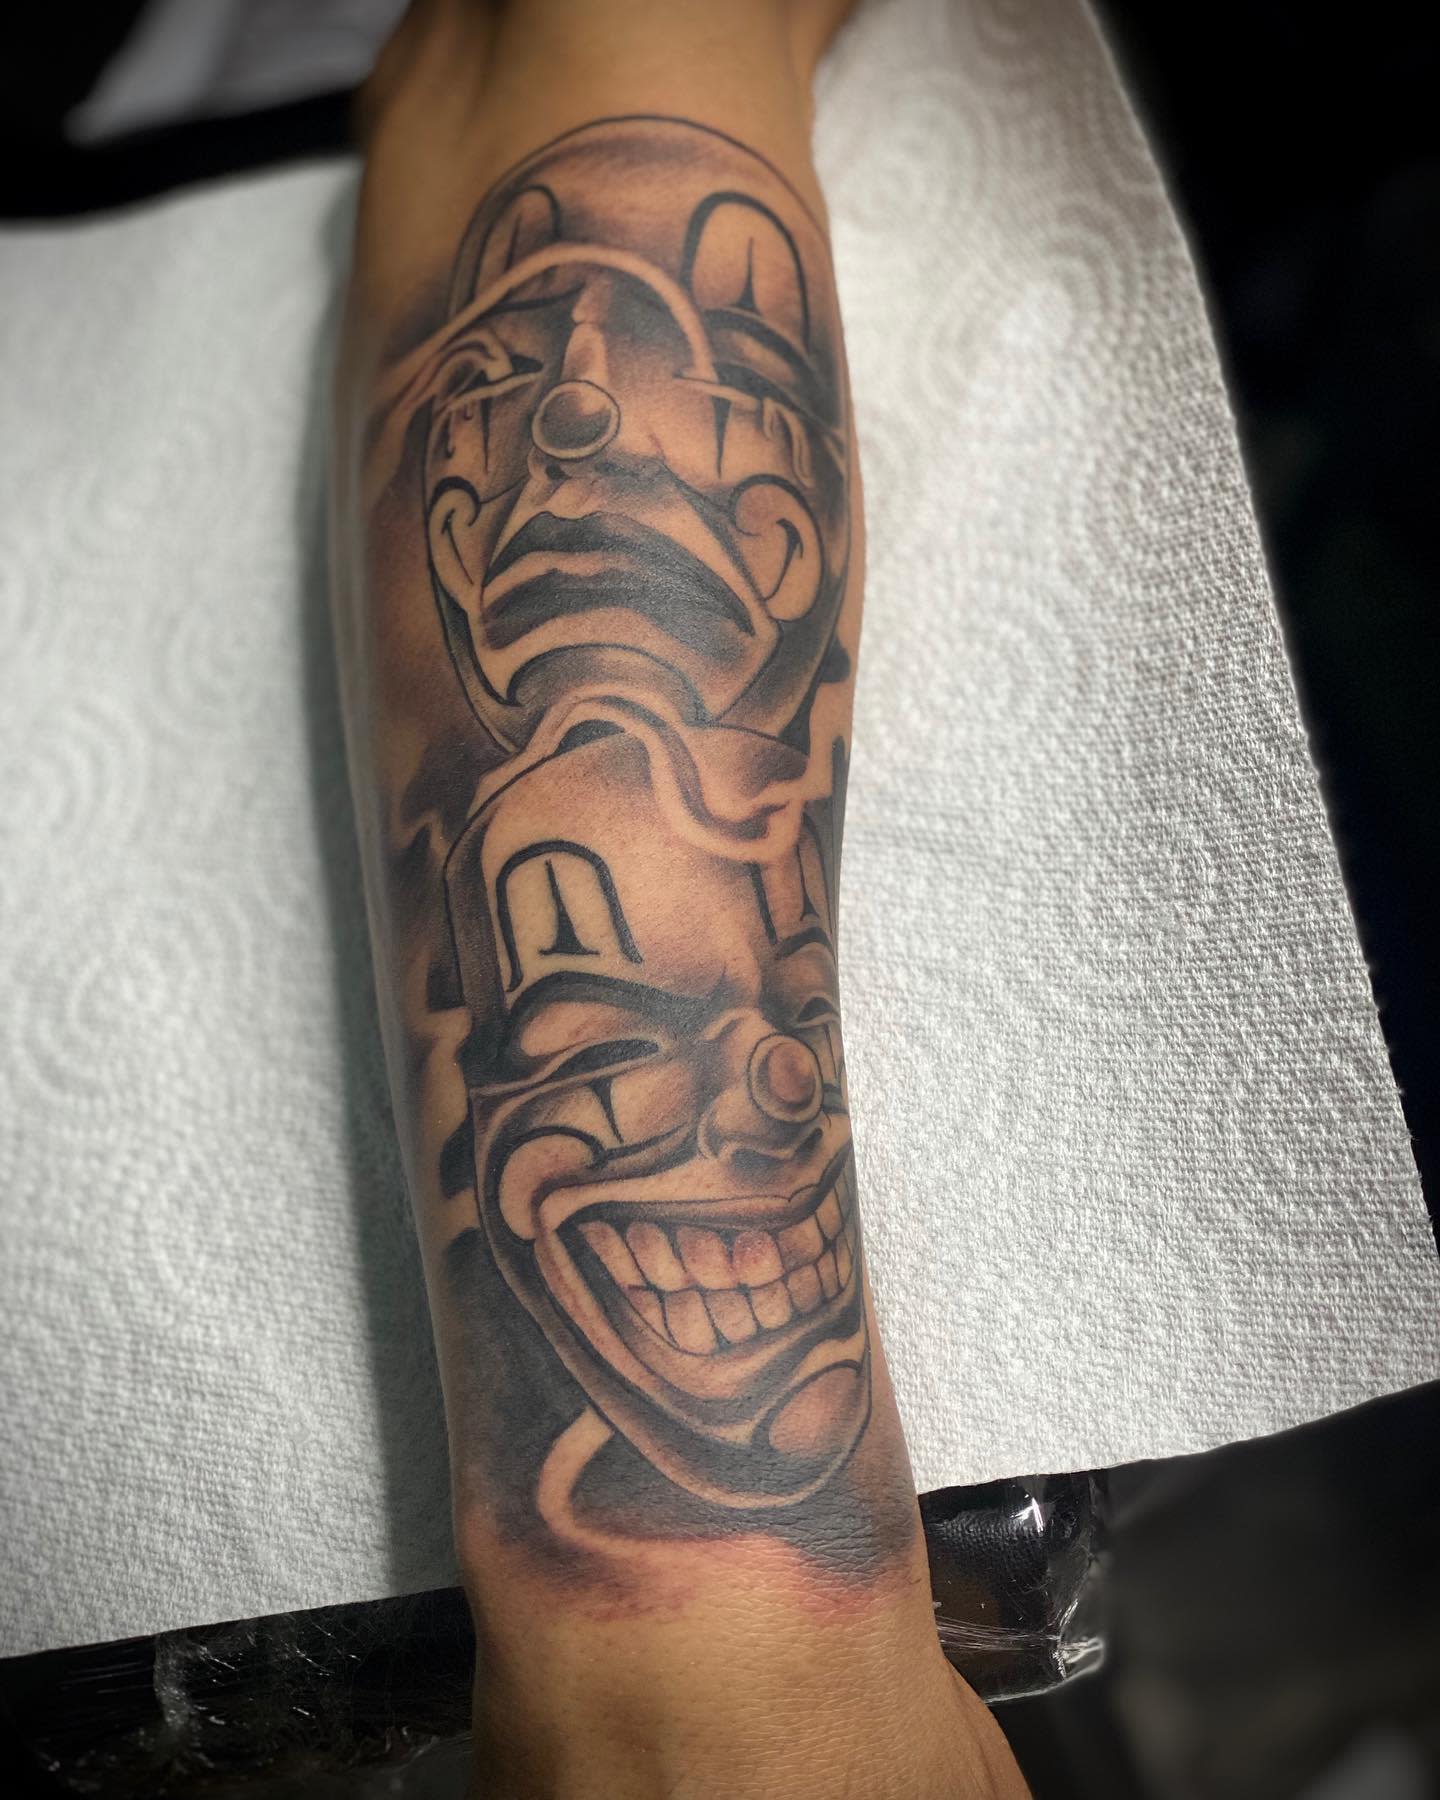 Clown Smile Now Cry Later Tattoo -neker_mx